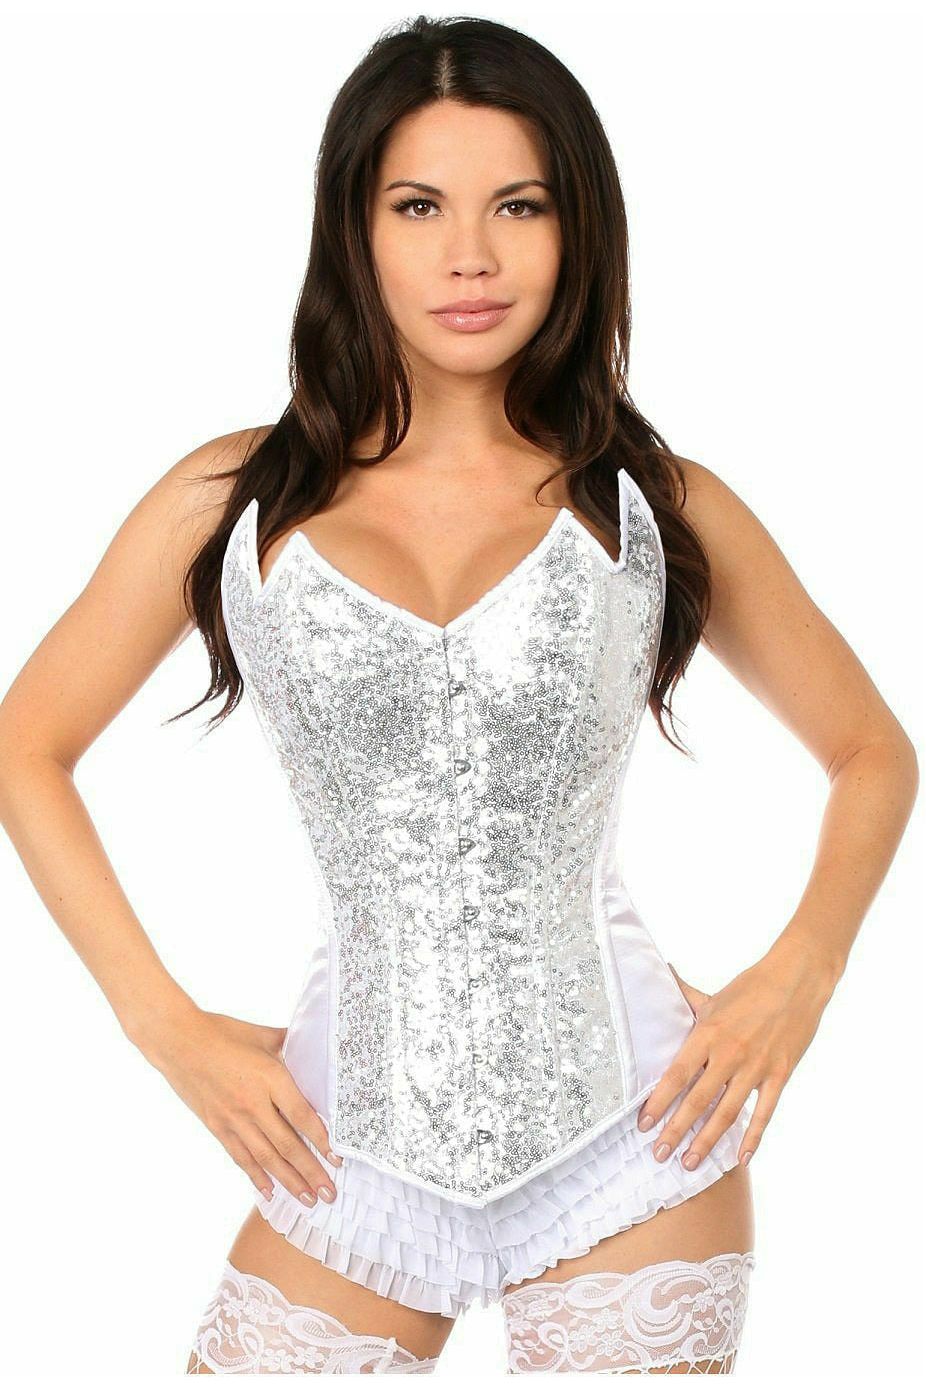 Top Drawer White/Silver Sequin Pointed Top Steel Boned Corset